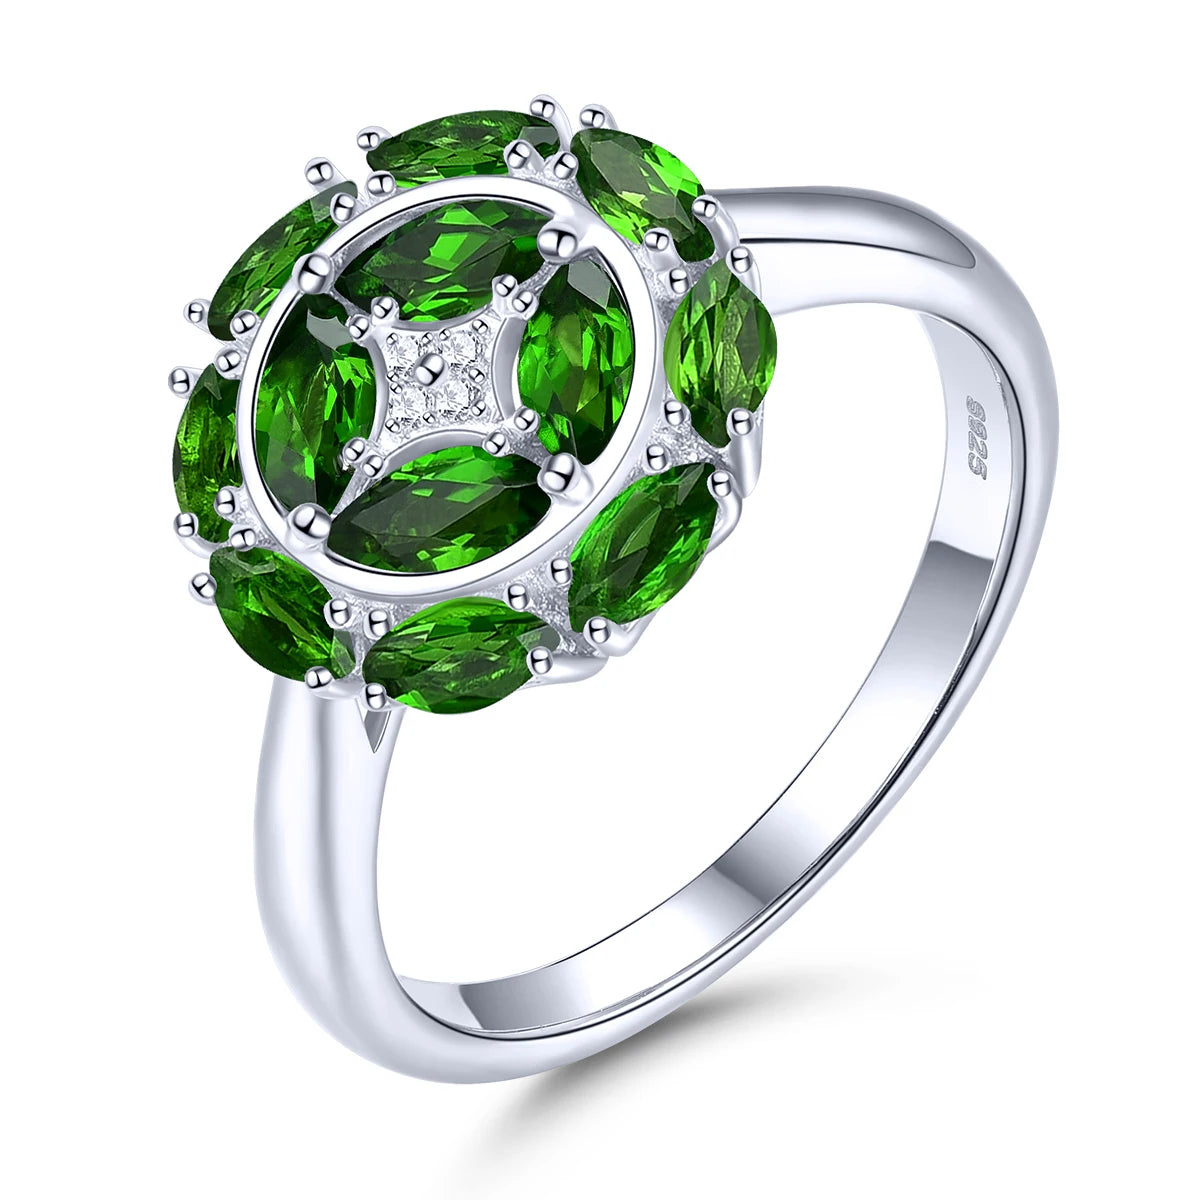 Natural Chrome Diopside Sterling Silver Rings 1.5 Carats Genuine Deep Green Gemstone Women Classic Design Jewelry Style S925 Natural Diopside